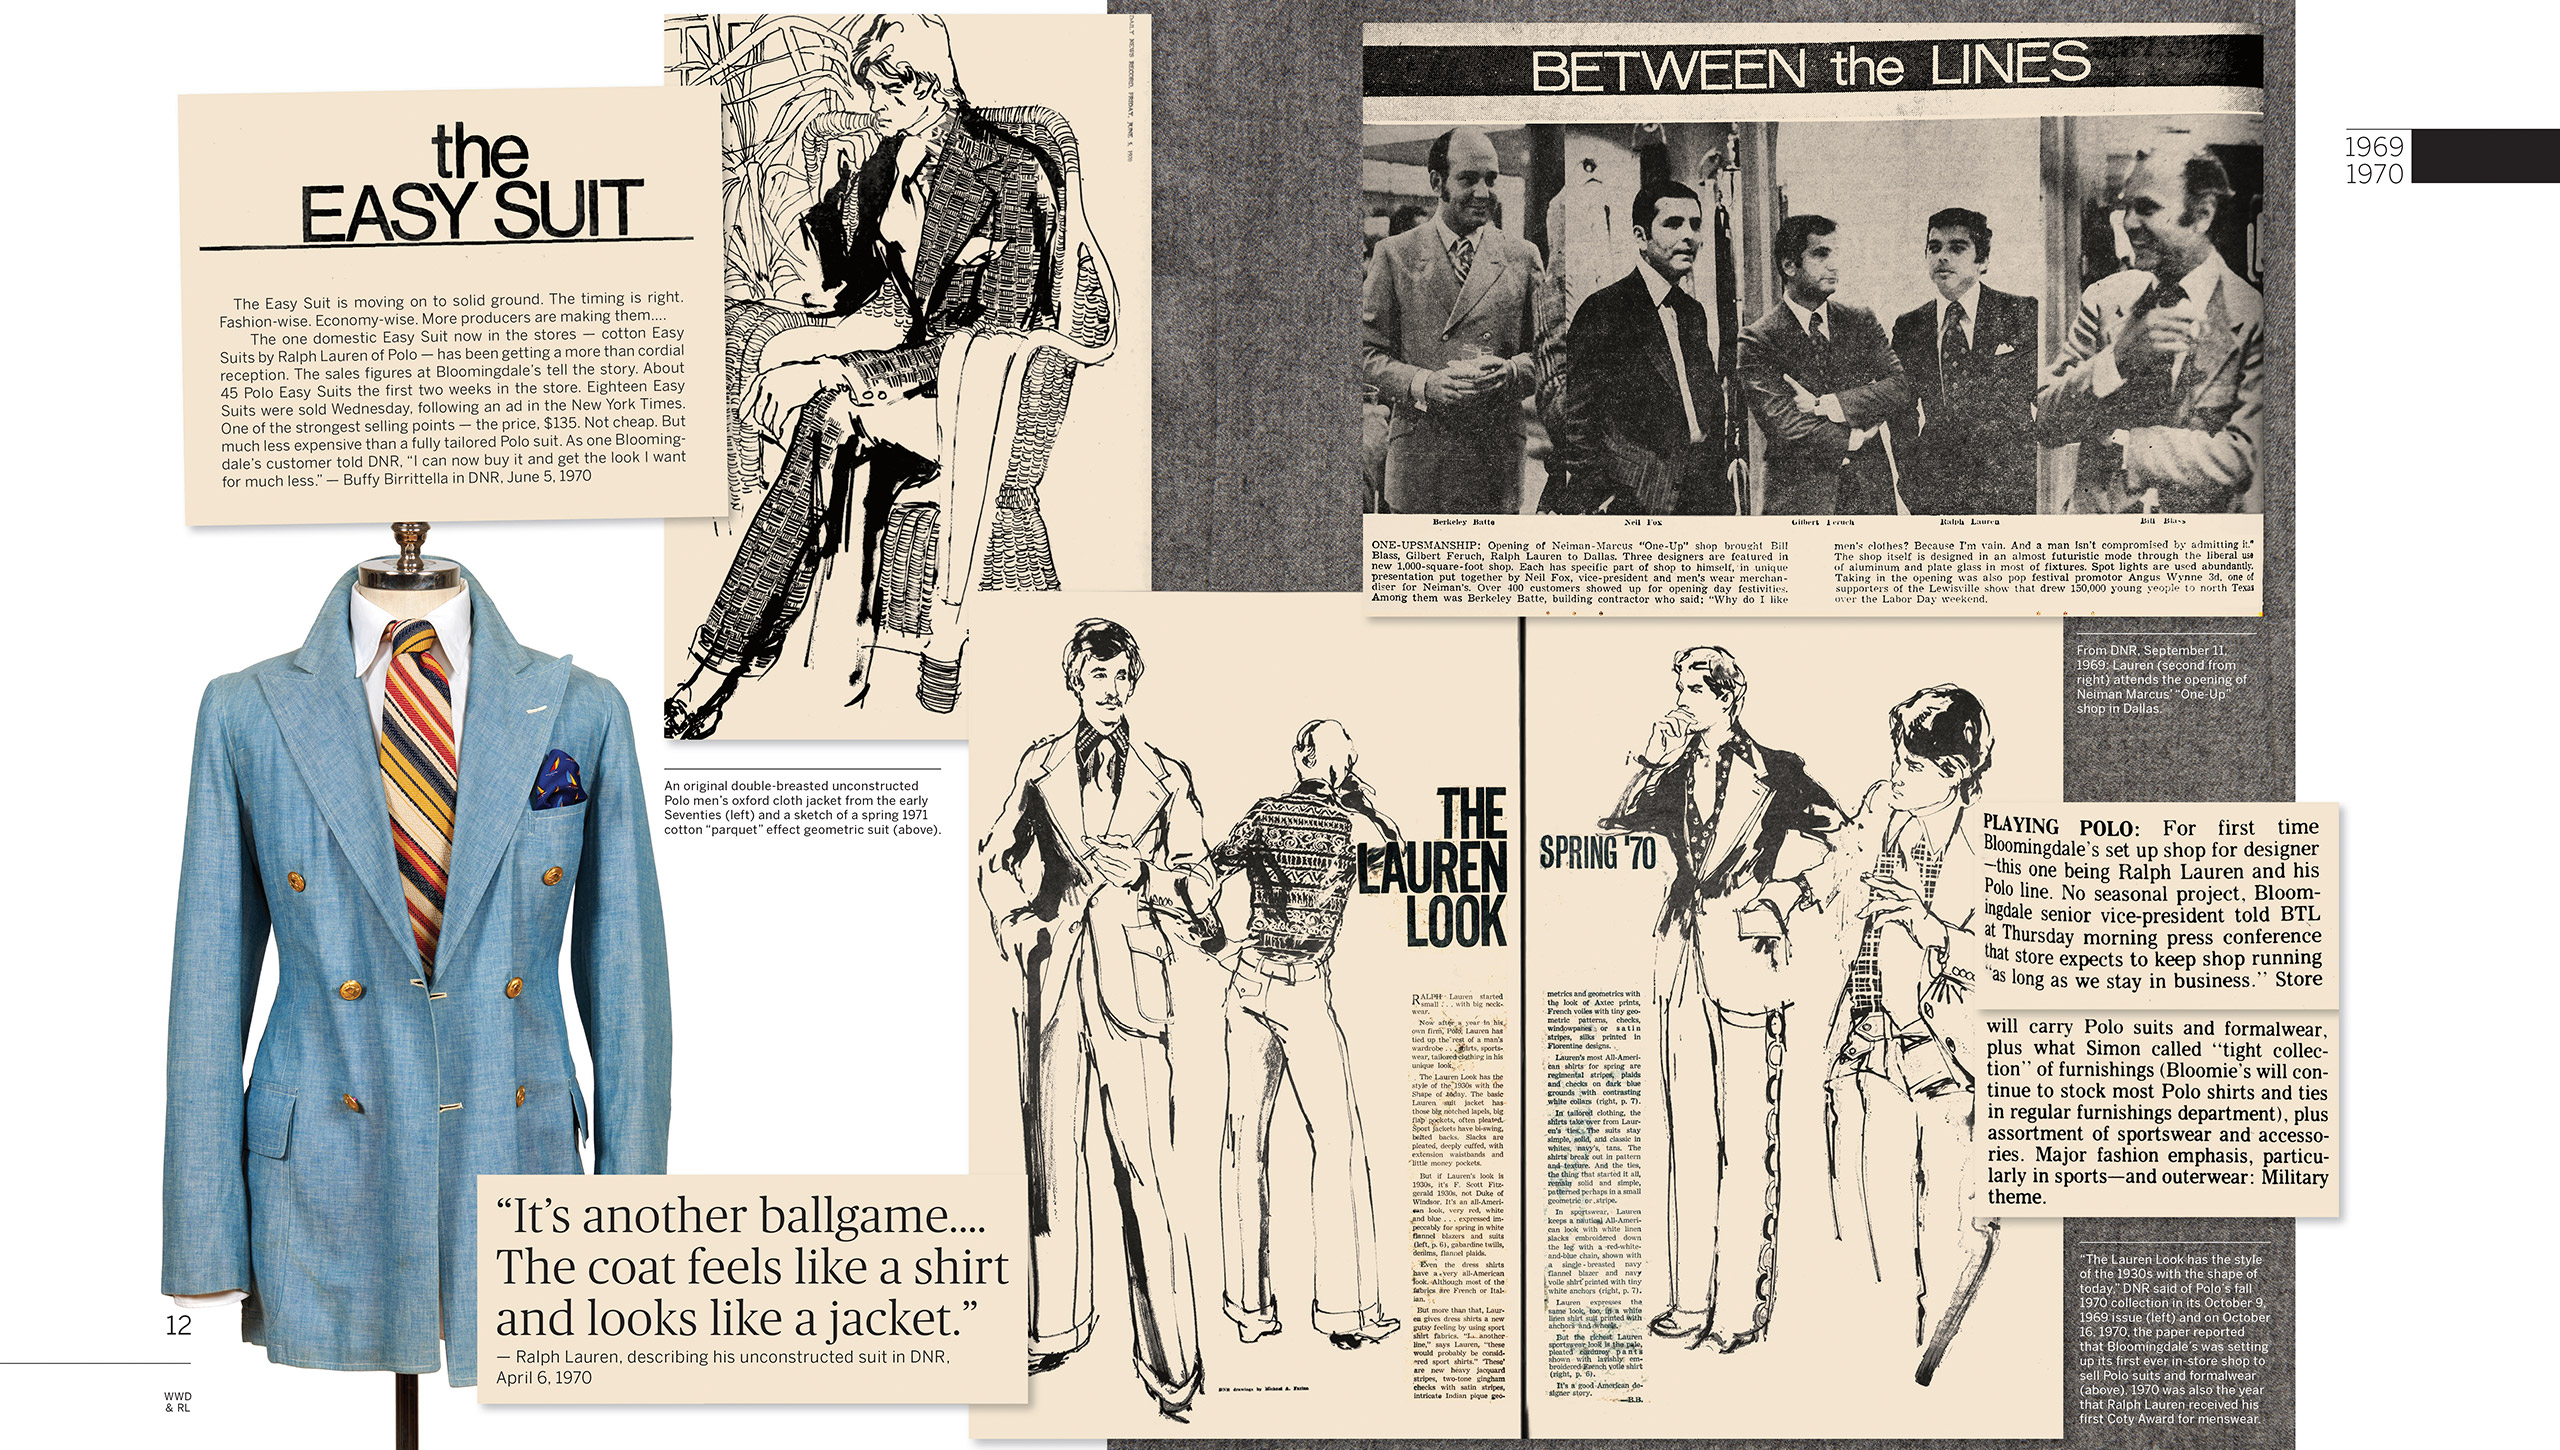 1970: &#x201C;The Lauren Look&#x201D; is becoming synonymous with the well-dressed American man. Mr. Lauren makes a splash with his oxford-cloth &#x201C;Easy Suit,&#x201D; selling 45 of them during the first two weeks of their debut at Bloomingdale&#x2019;s. The legendary retailer sets up a designated Ralph Lauren shop within their store&#x2014;the first of its kind for any designer. The Polo line expands to include sportswear and accessories. Later that year, Mr. Lauren wins his first Coty Award for menswear.